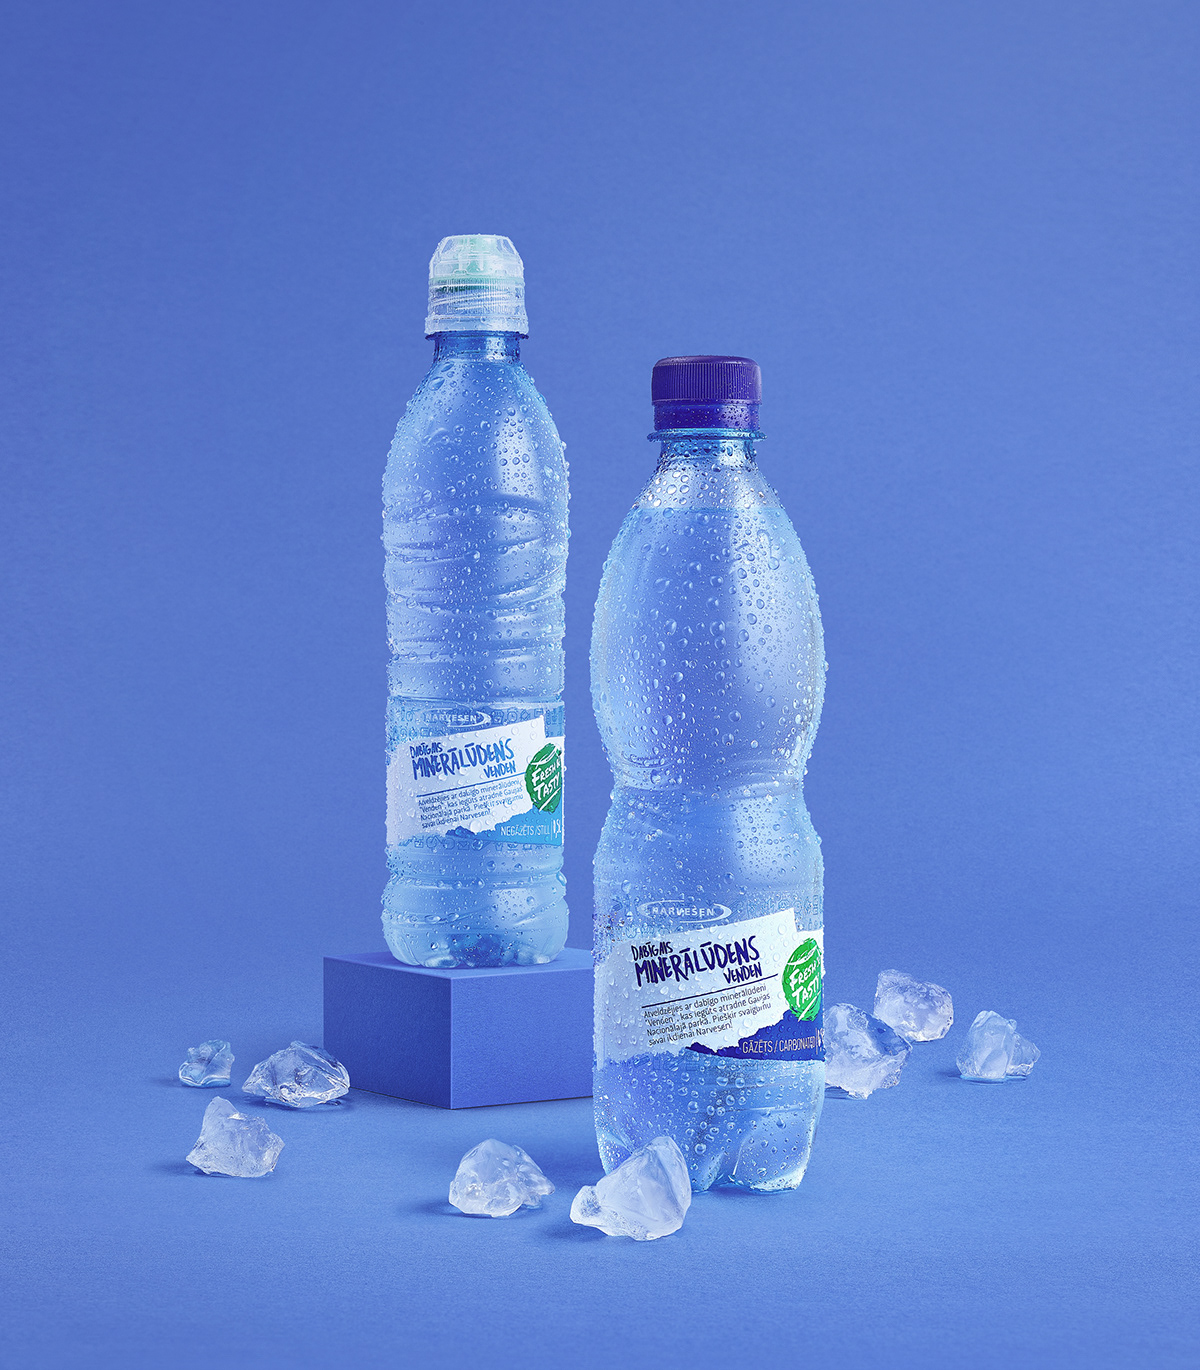 #ad #Advertising #blue   #bottles   #cold #drink #Foodphotography  #fresh #ice #water  